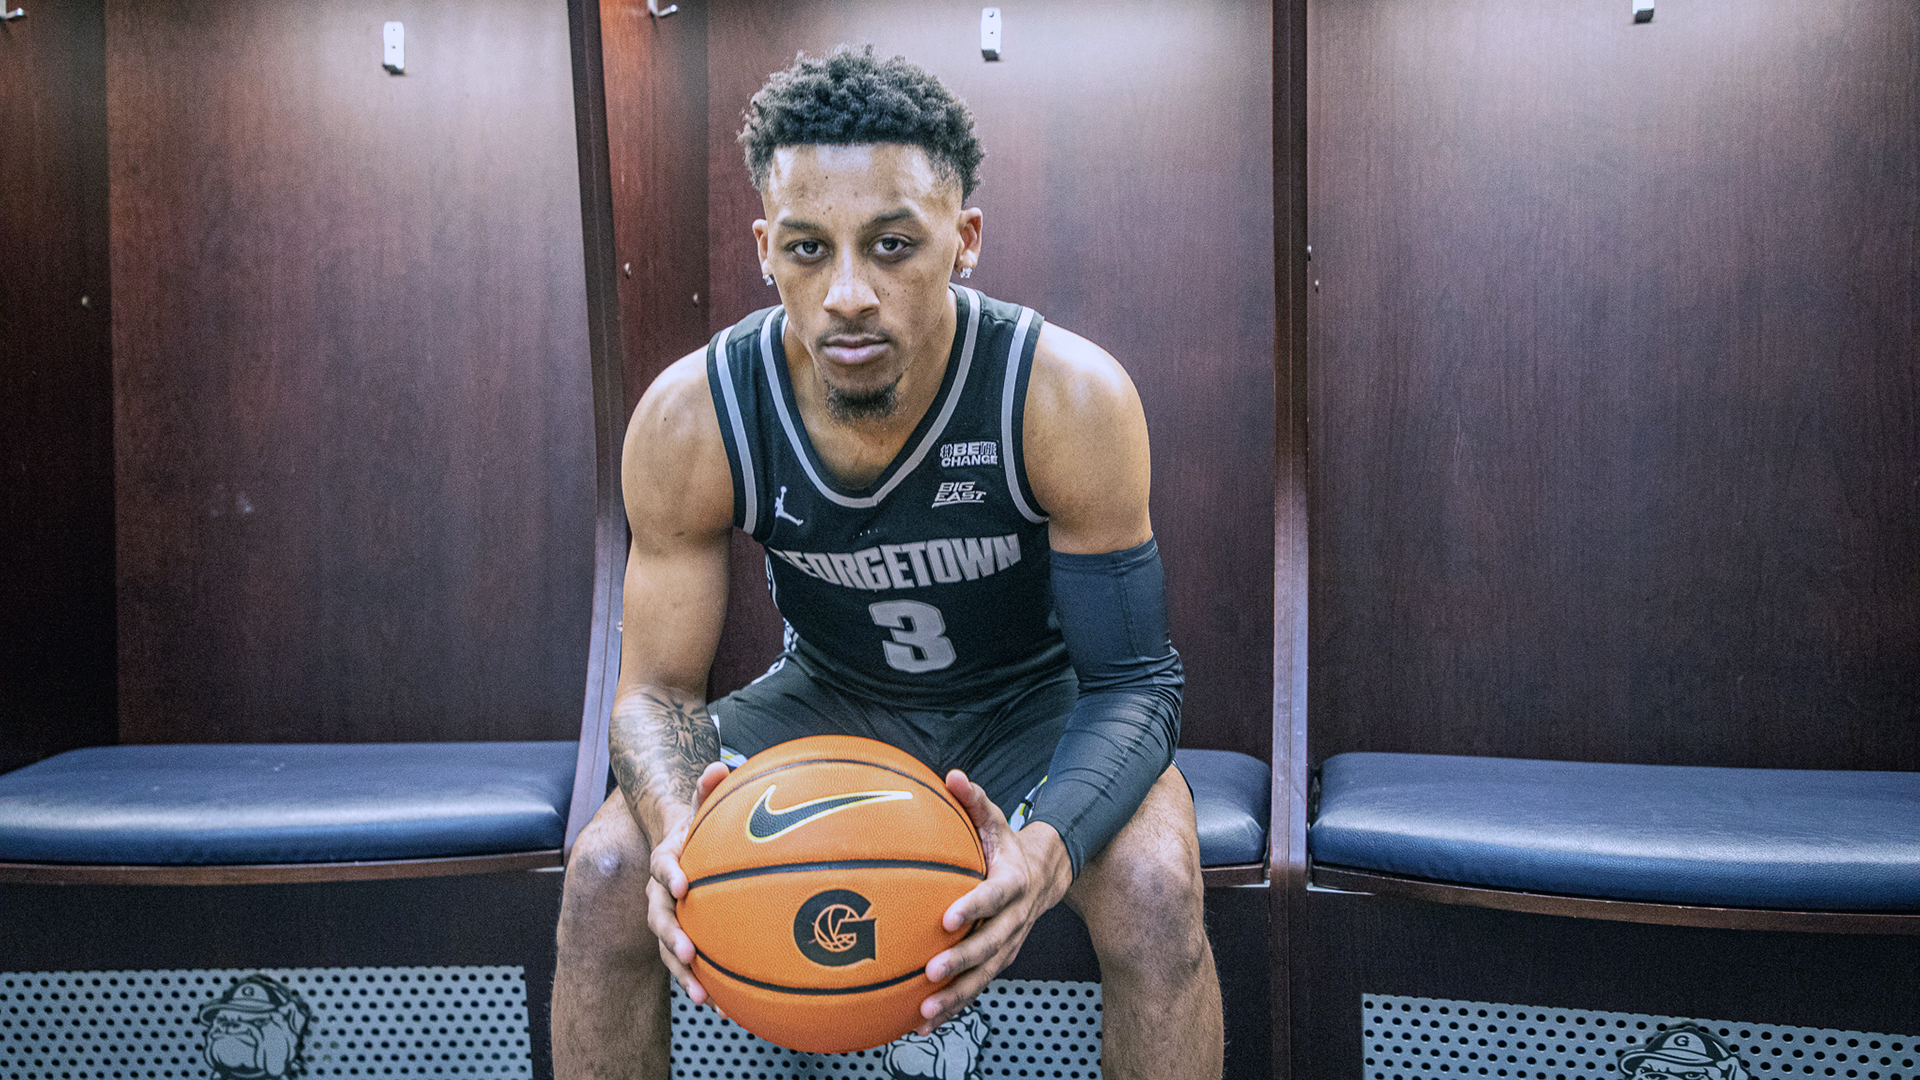 Georgetown guard Primo Spears gets ready for the season after entering the transfer portal.